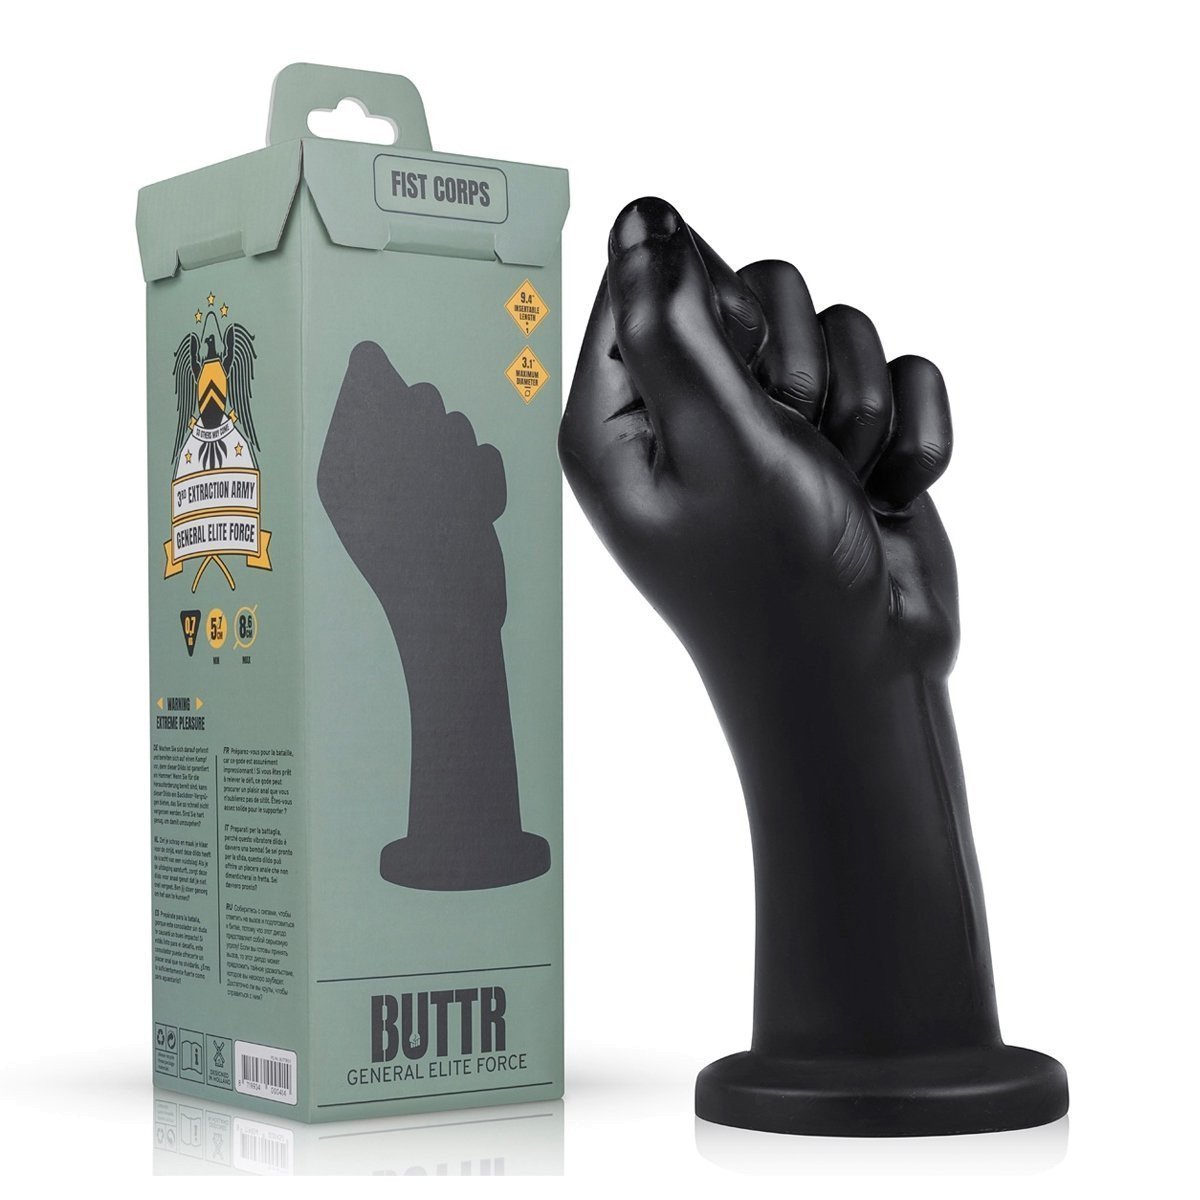 XXL analinis dildo „General Elite Force Fist Corps“ - Buttr